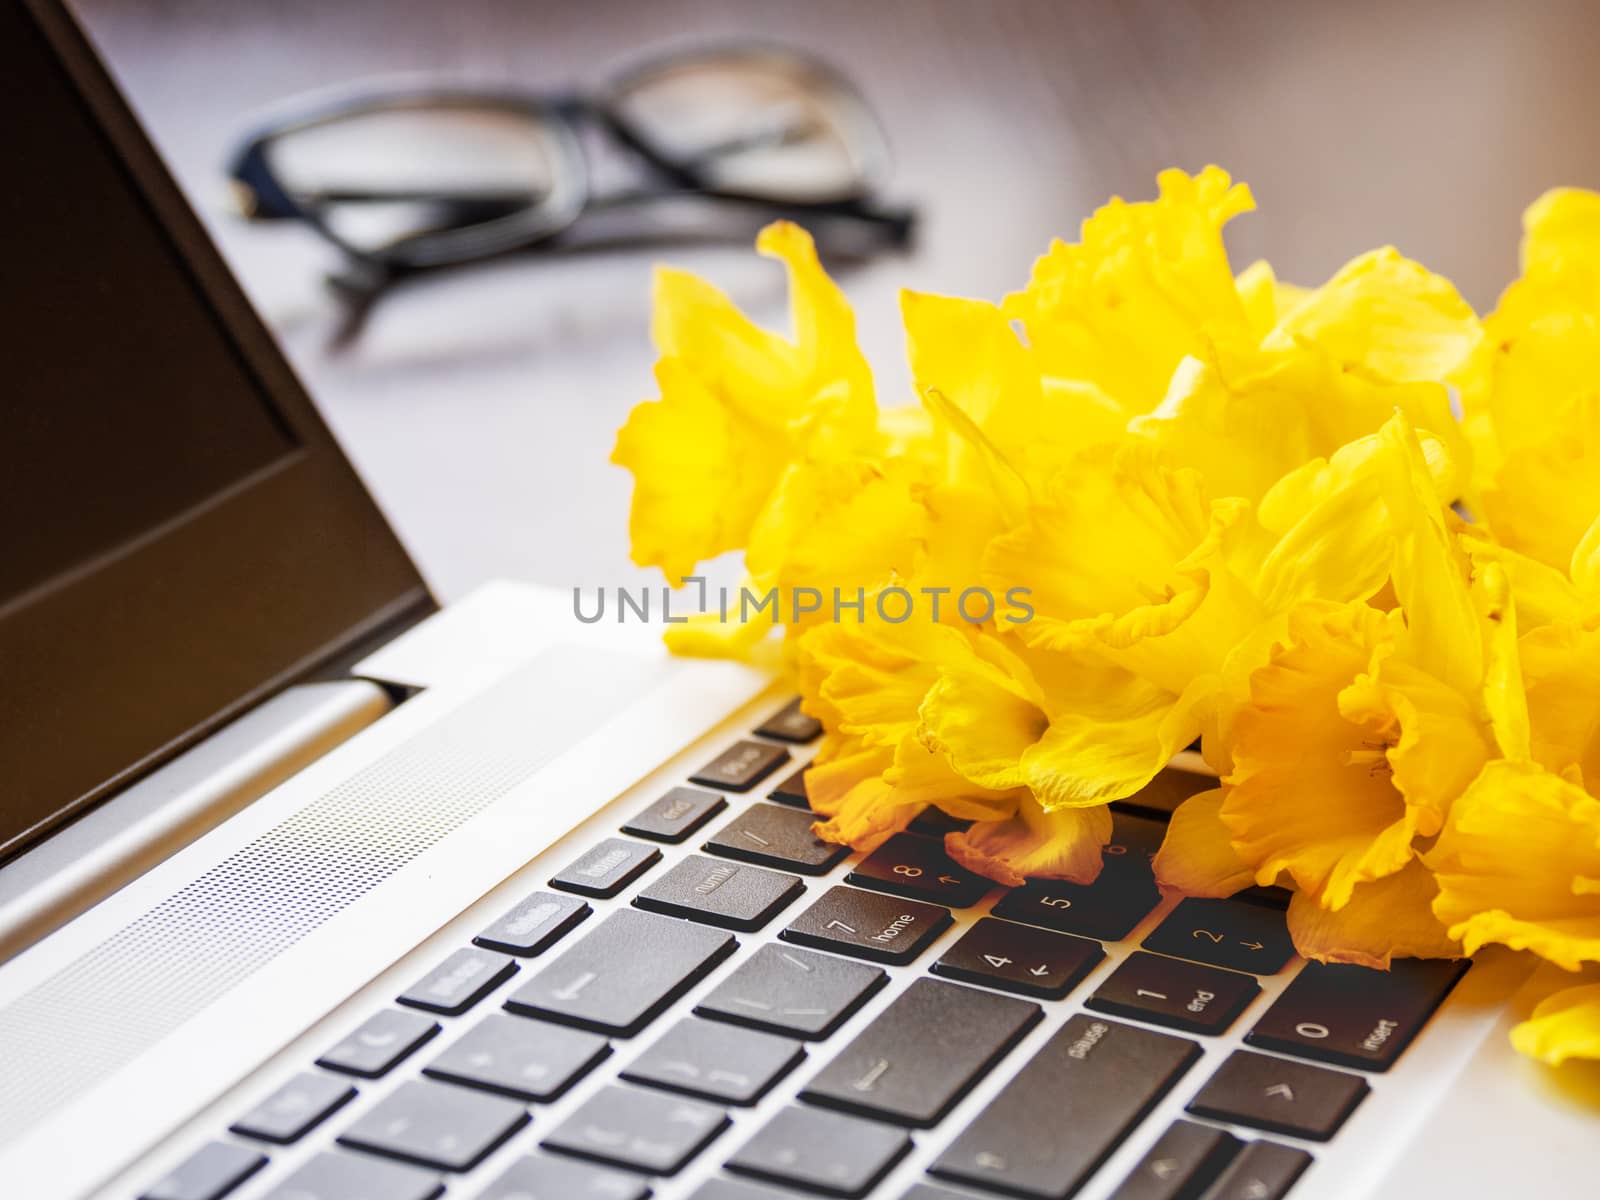 Bouquet of Narcissus or daffodils lying on silver metal laptop. Bright yellow flowers on portable device. Wooden background with glasses. by aksenovko